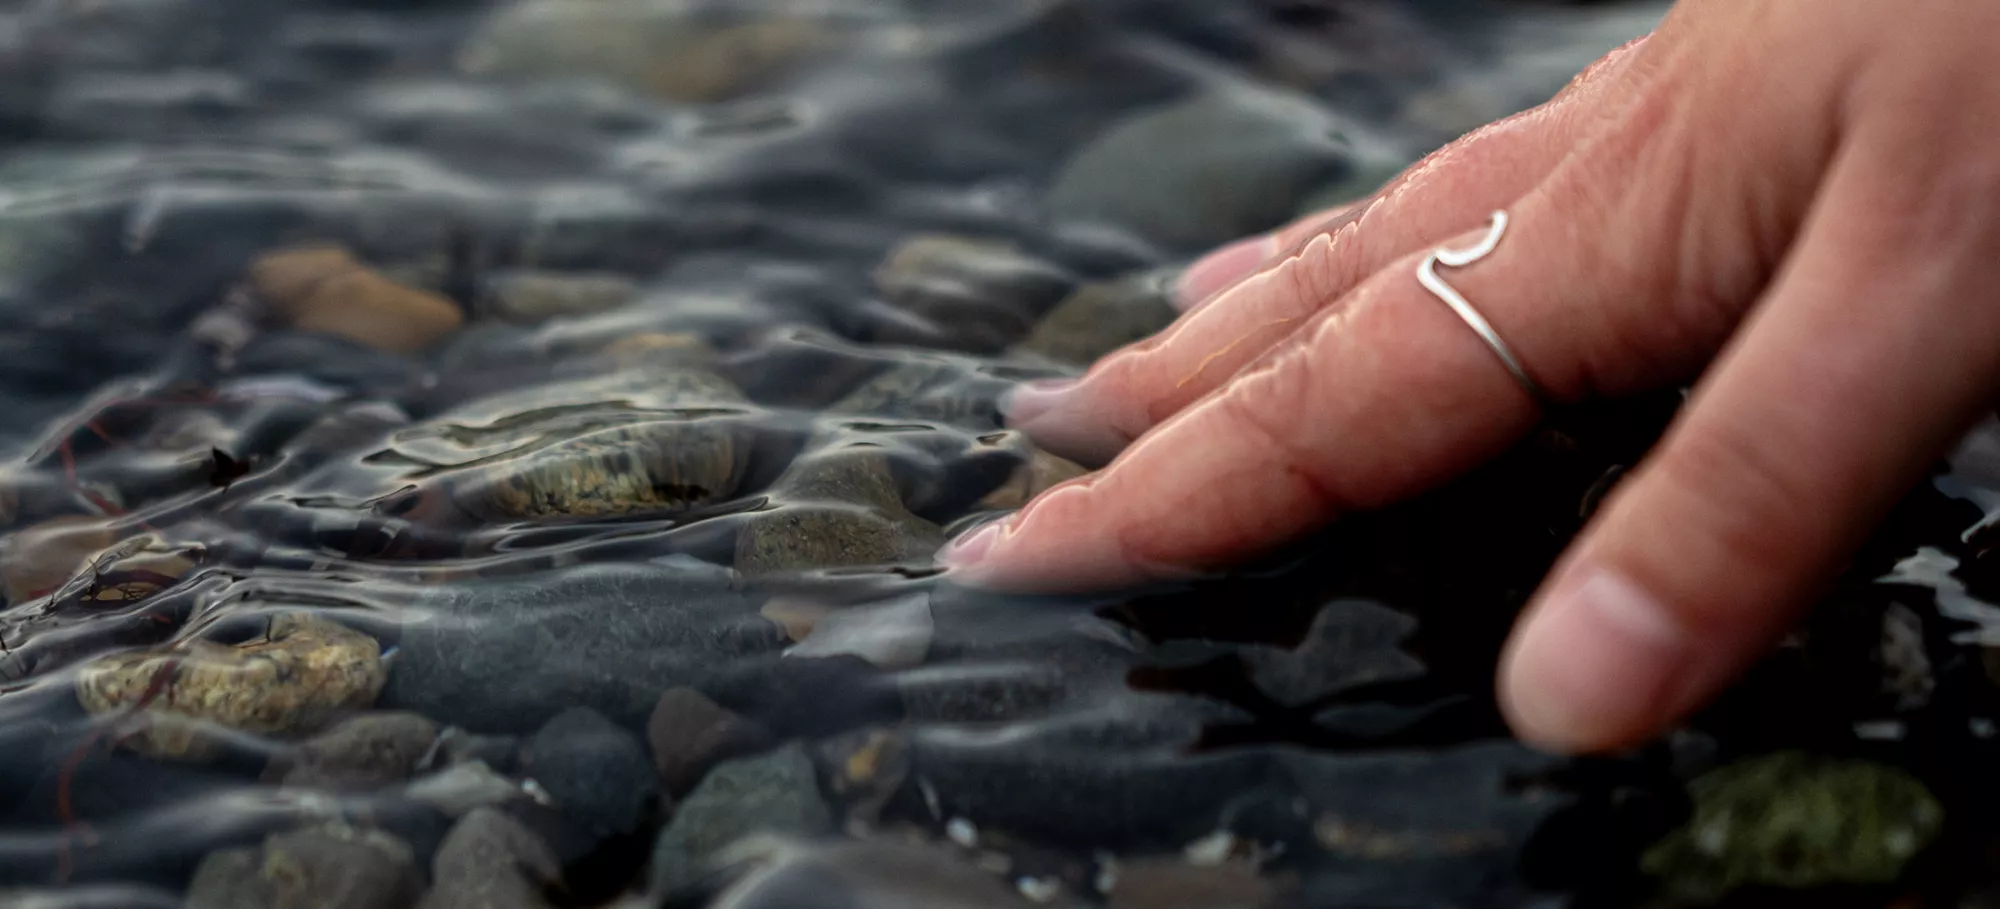 A hand with a ring gently touching the water's surface, creating ripples.